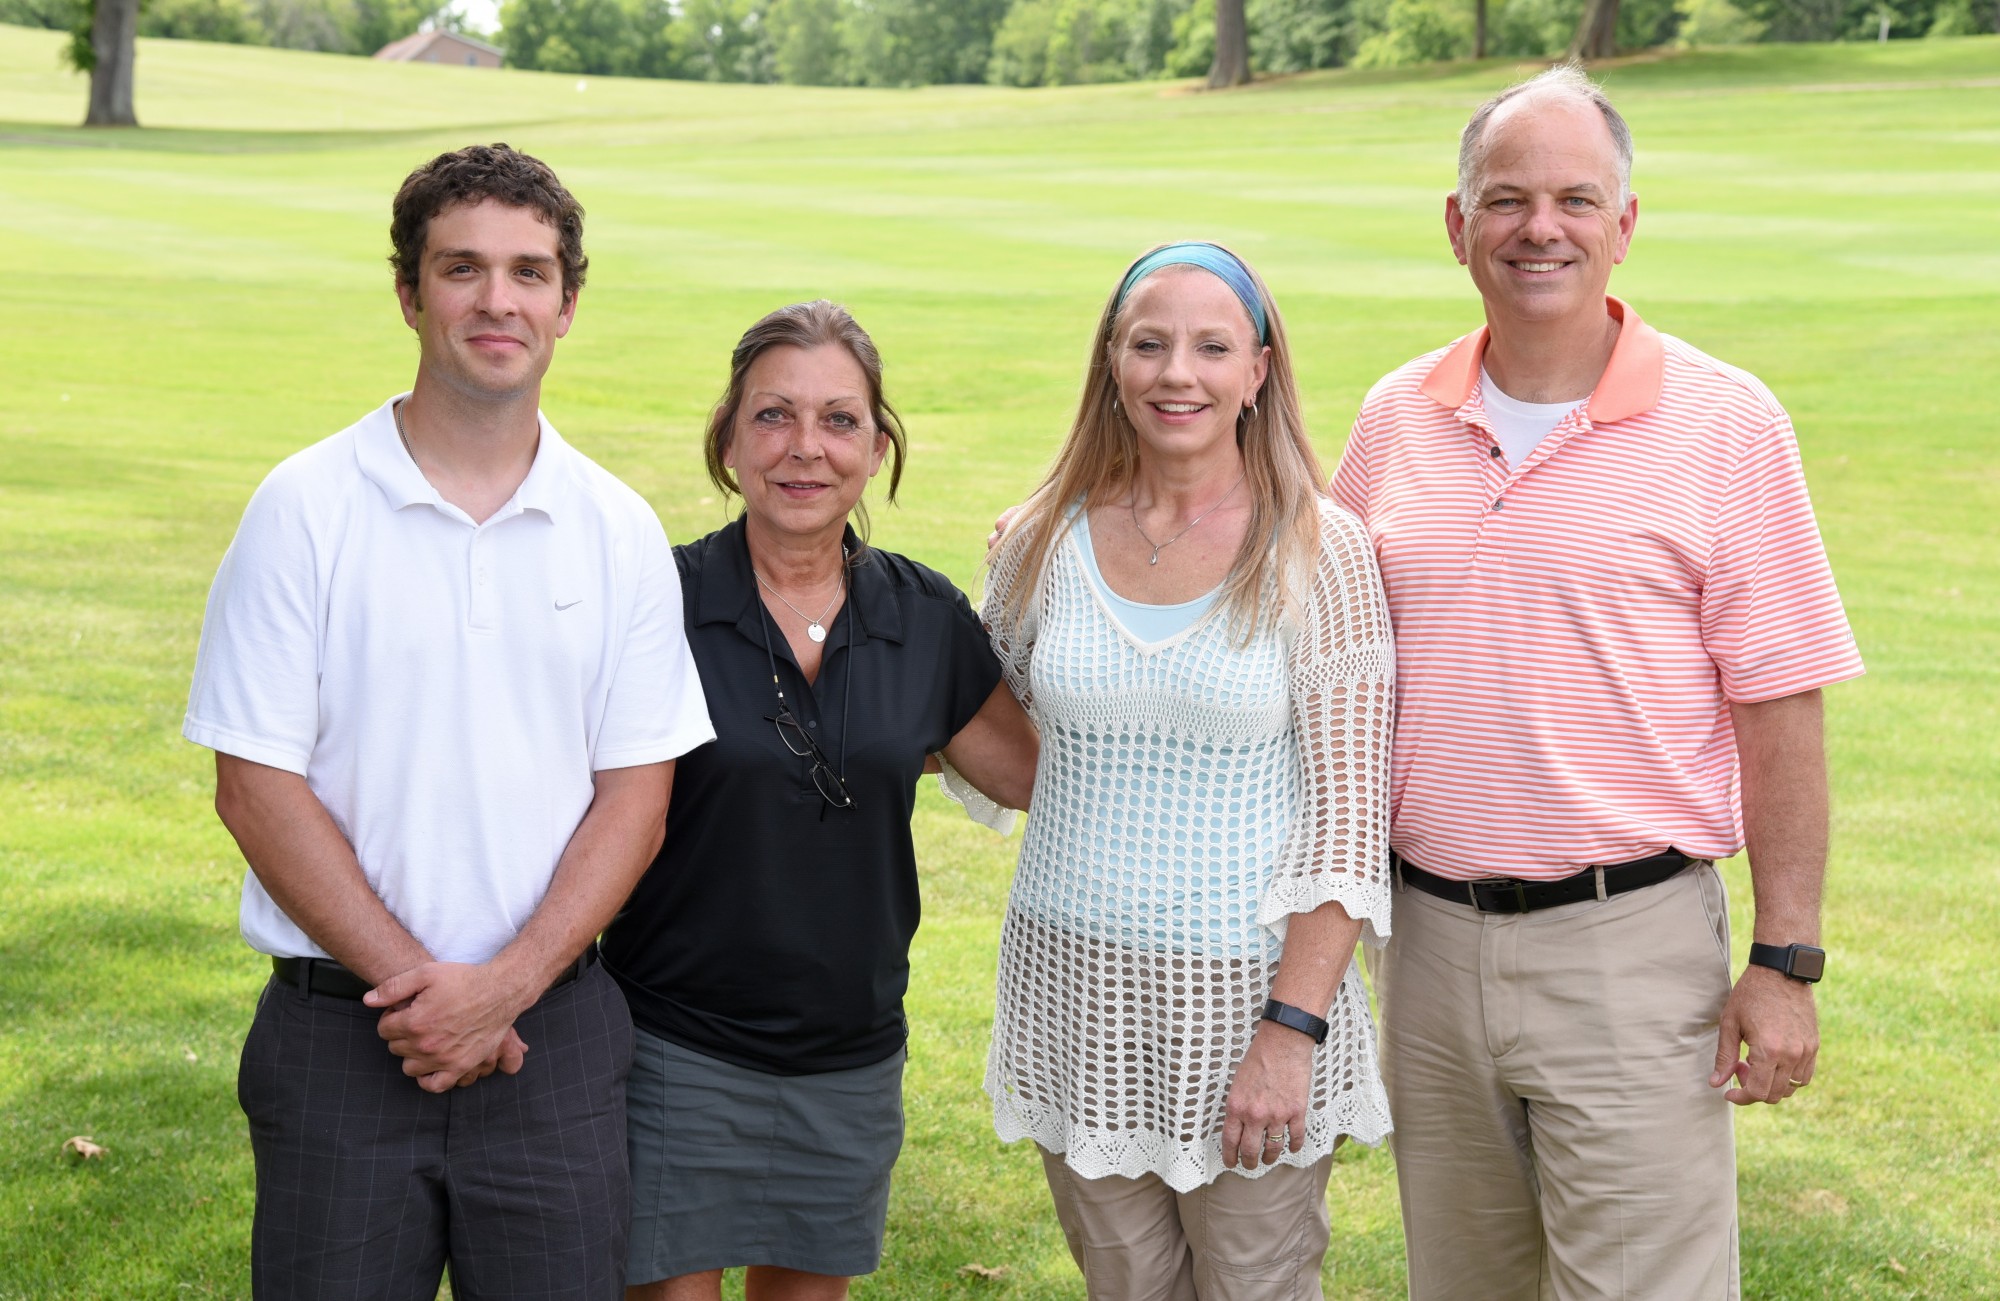 Samaritan Hospital Foundation matches Charity Golf Classic proceeds to generate $38,000 for local initiatives